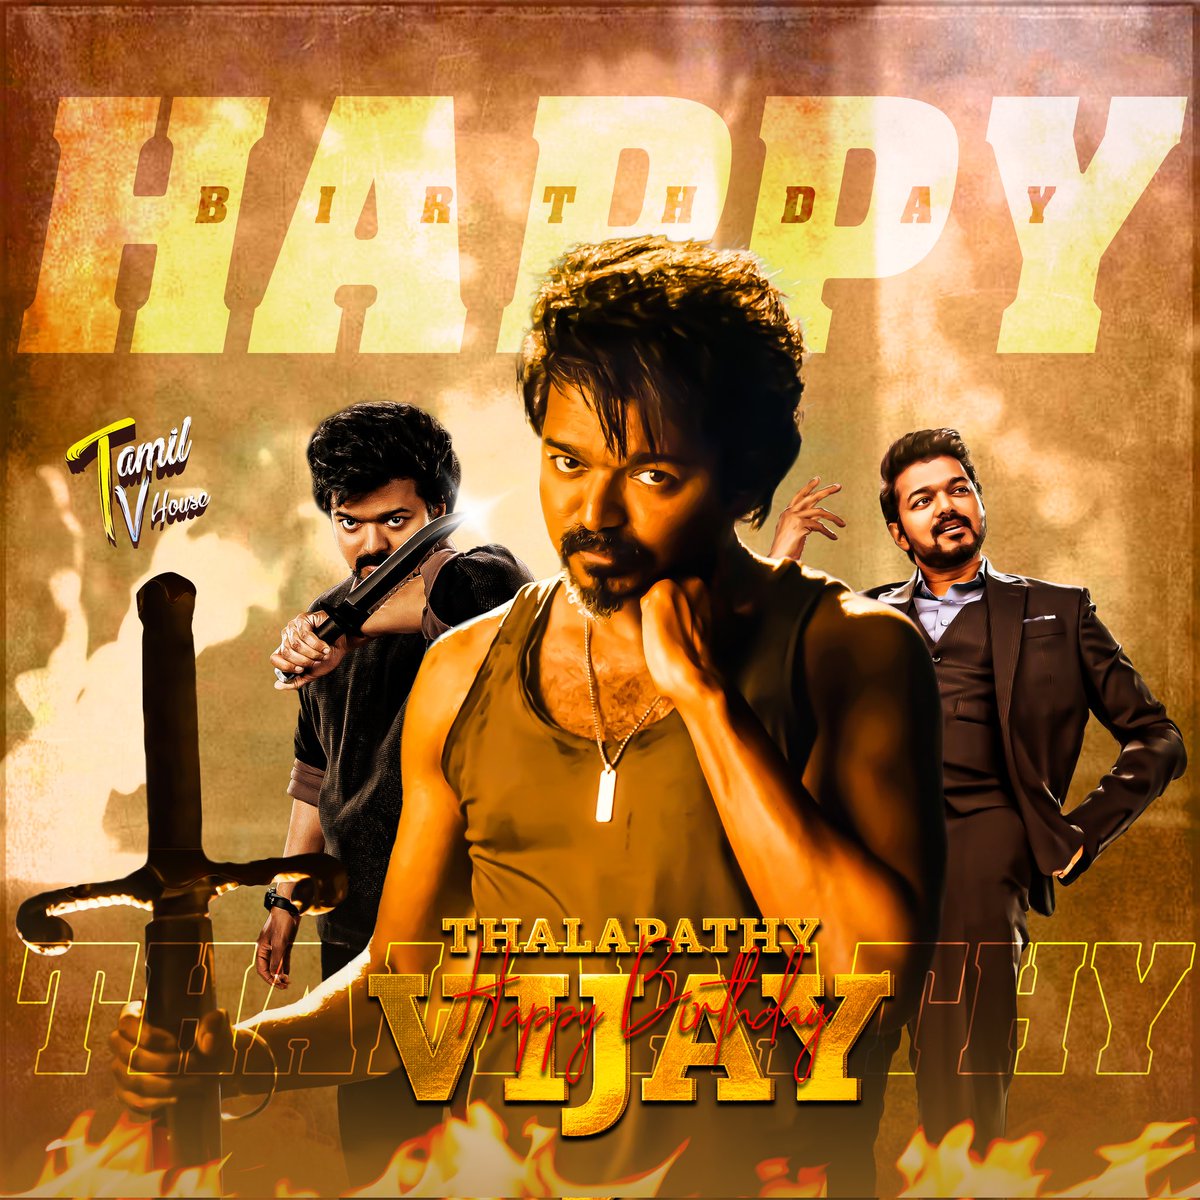 Wishing the self challenger of Tamil cinema 
Advance Happy Birthday #ThalapathyVijay 🎂 
Here it is our special CDP 🎁

#SAISANGO #TAMILTVHouse #Thalapathy
#HappyBirthdayThalapathy #HBDThalapathy
#HBDThalapathyVIJAY #ThalapathyVIJAYBdayCDP #ThalapathyVijayBirthday